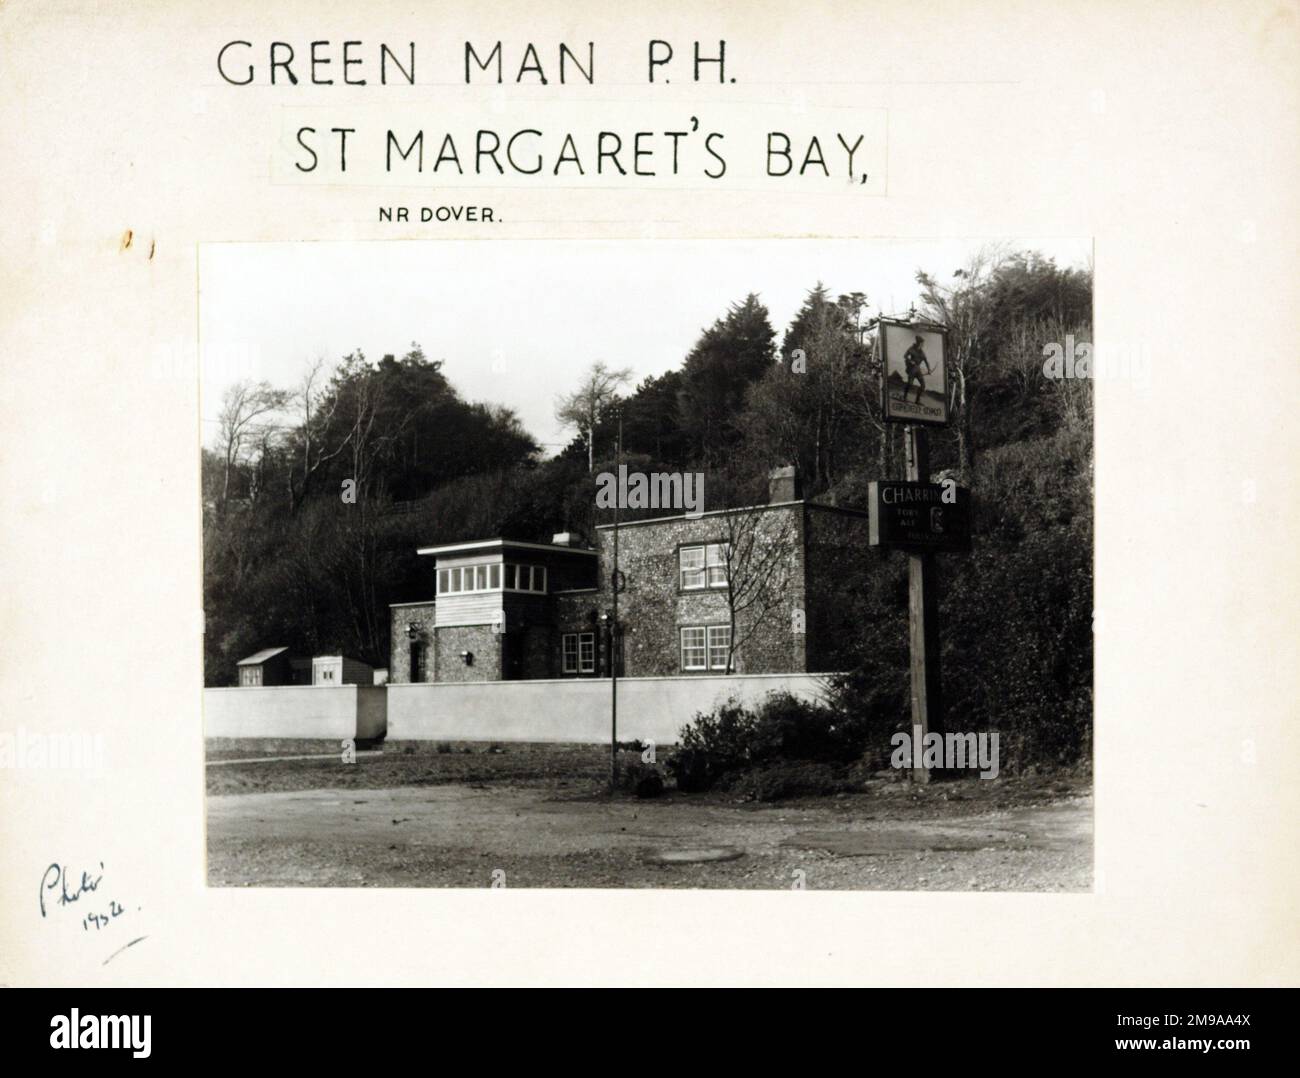 Photograph of Green Man PH, St Margarets Bay, Kent. The main side of the print (shown here) depicts: Right face on view of the pub.  The back of the print (available on request) details: Trading Record 1954 . 1963 for the Green Man, St Margarets Bay, Kent CT15 6DY. As of July 2018 . Now 'The Coastguard', Shepherd Neame Stock Photo